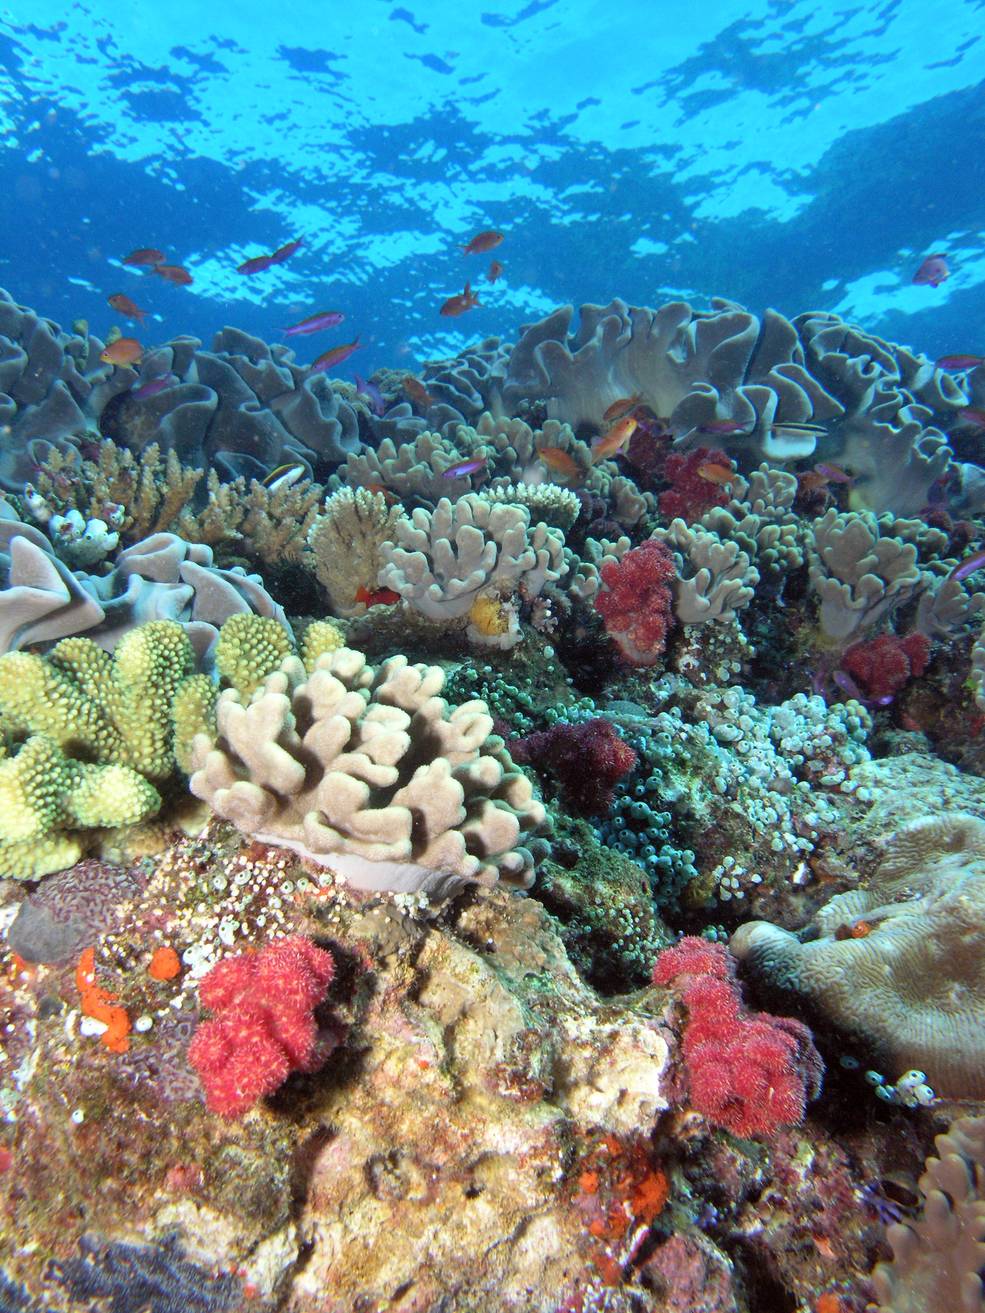 NASA coral reef studies in Hawaii this year will help scientists understand this unique environment.  Image: NOAA